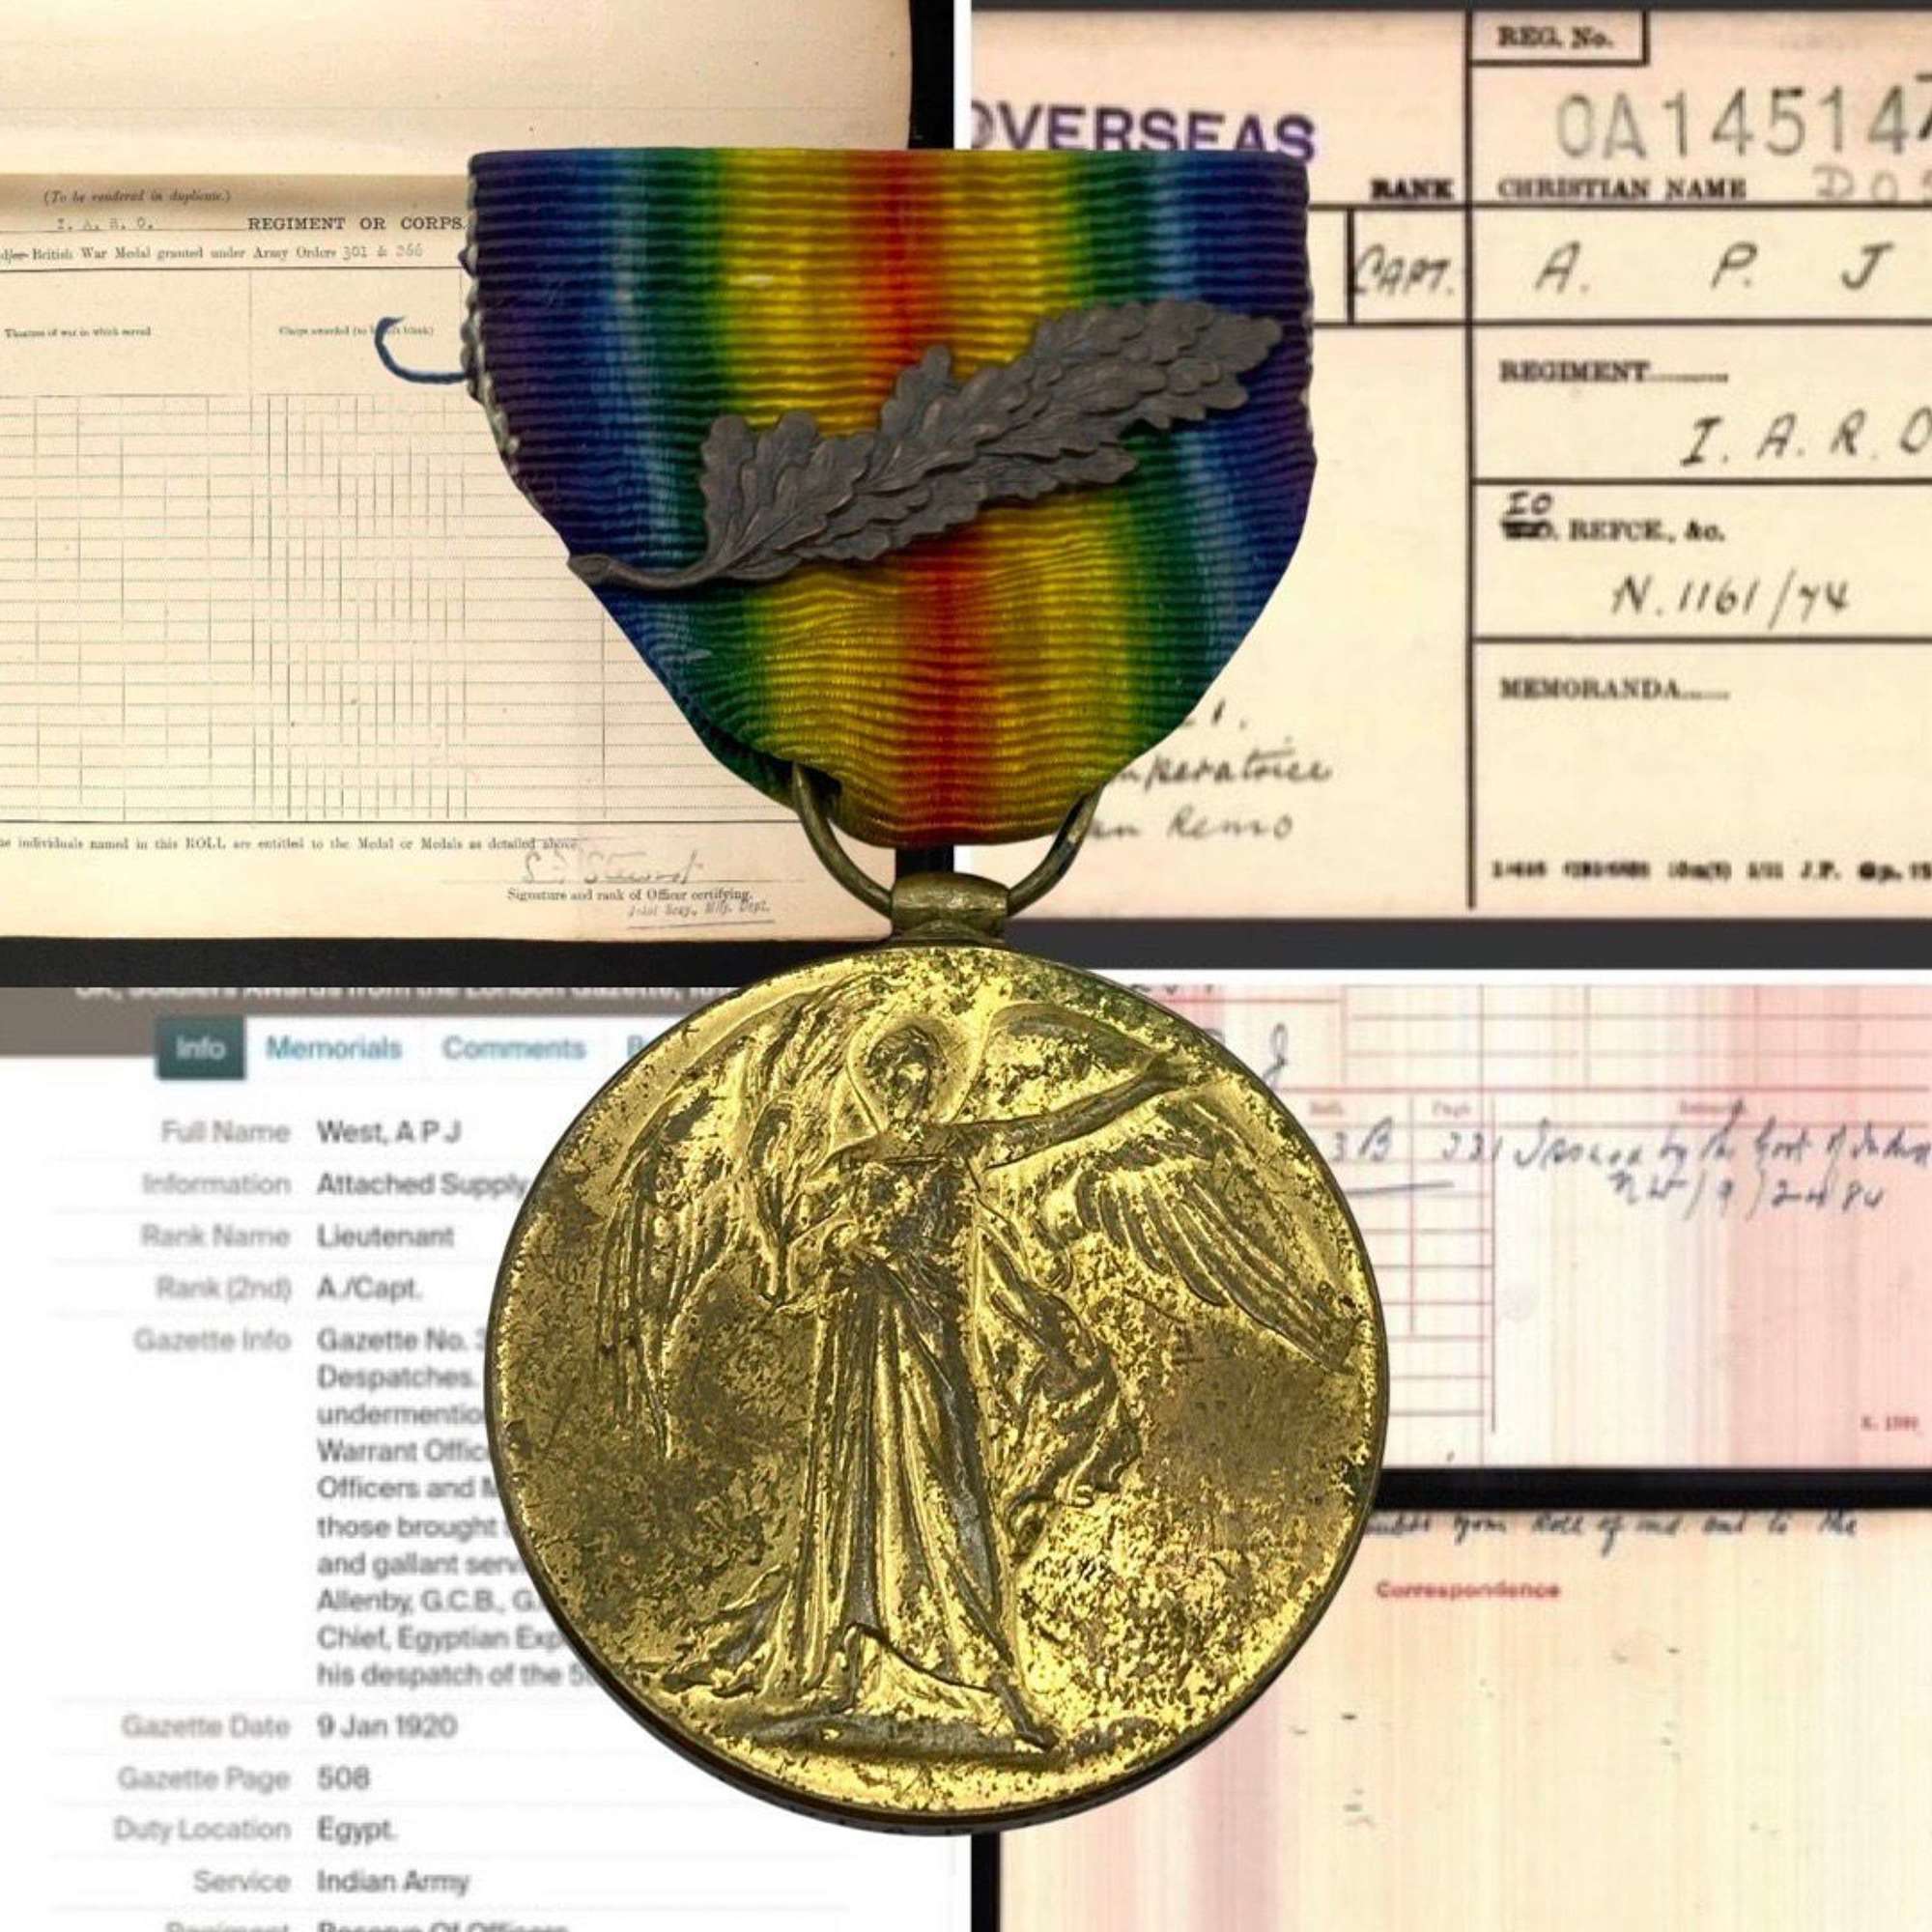 WW1 Victory Medal & MID Oak Leaf To Captain A P J West  Indian Army